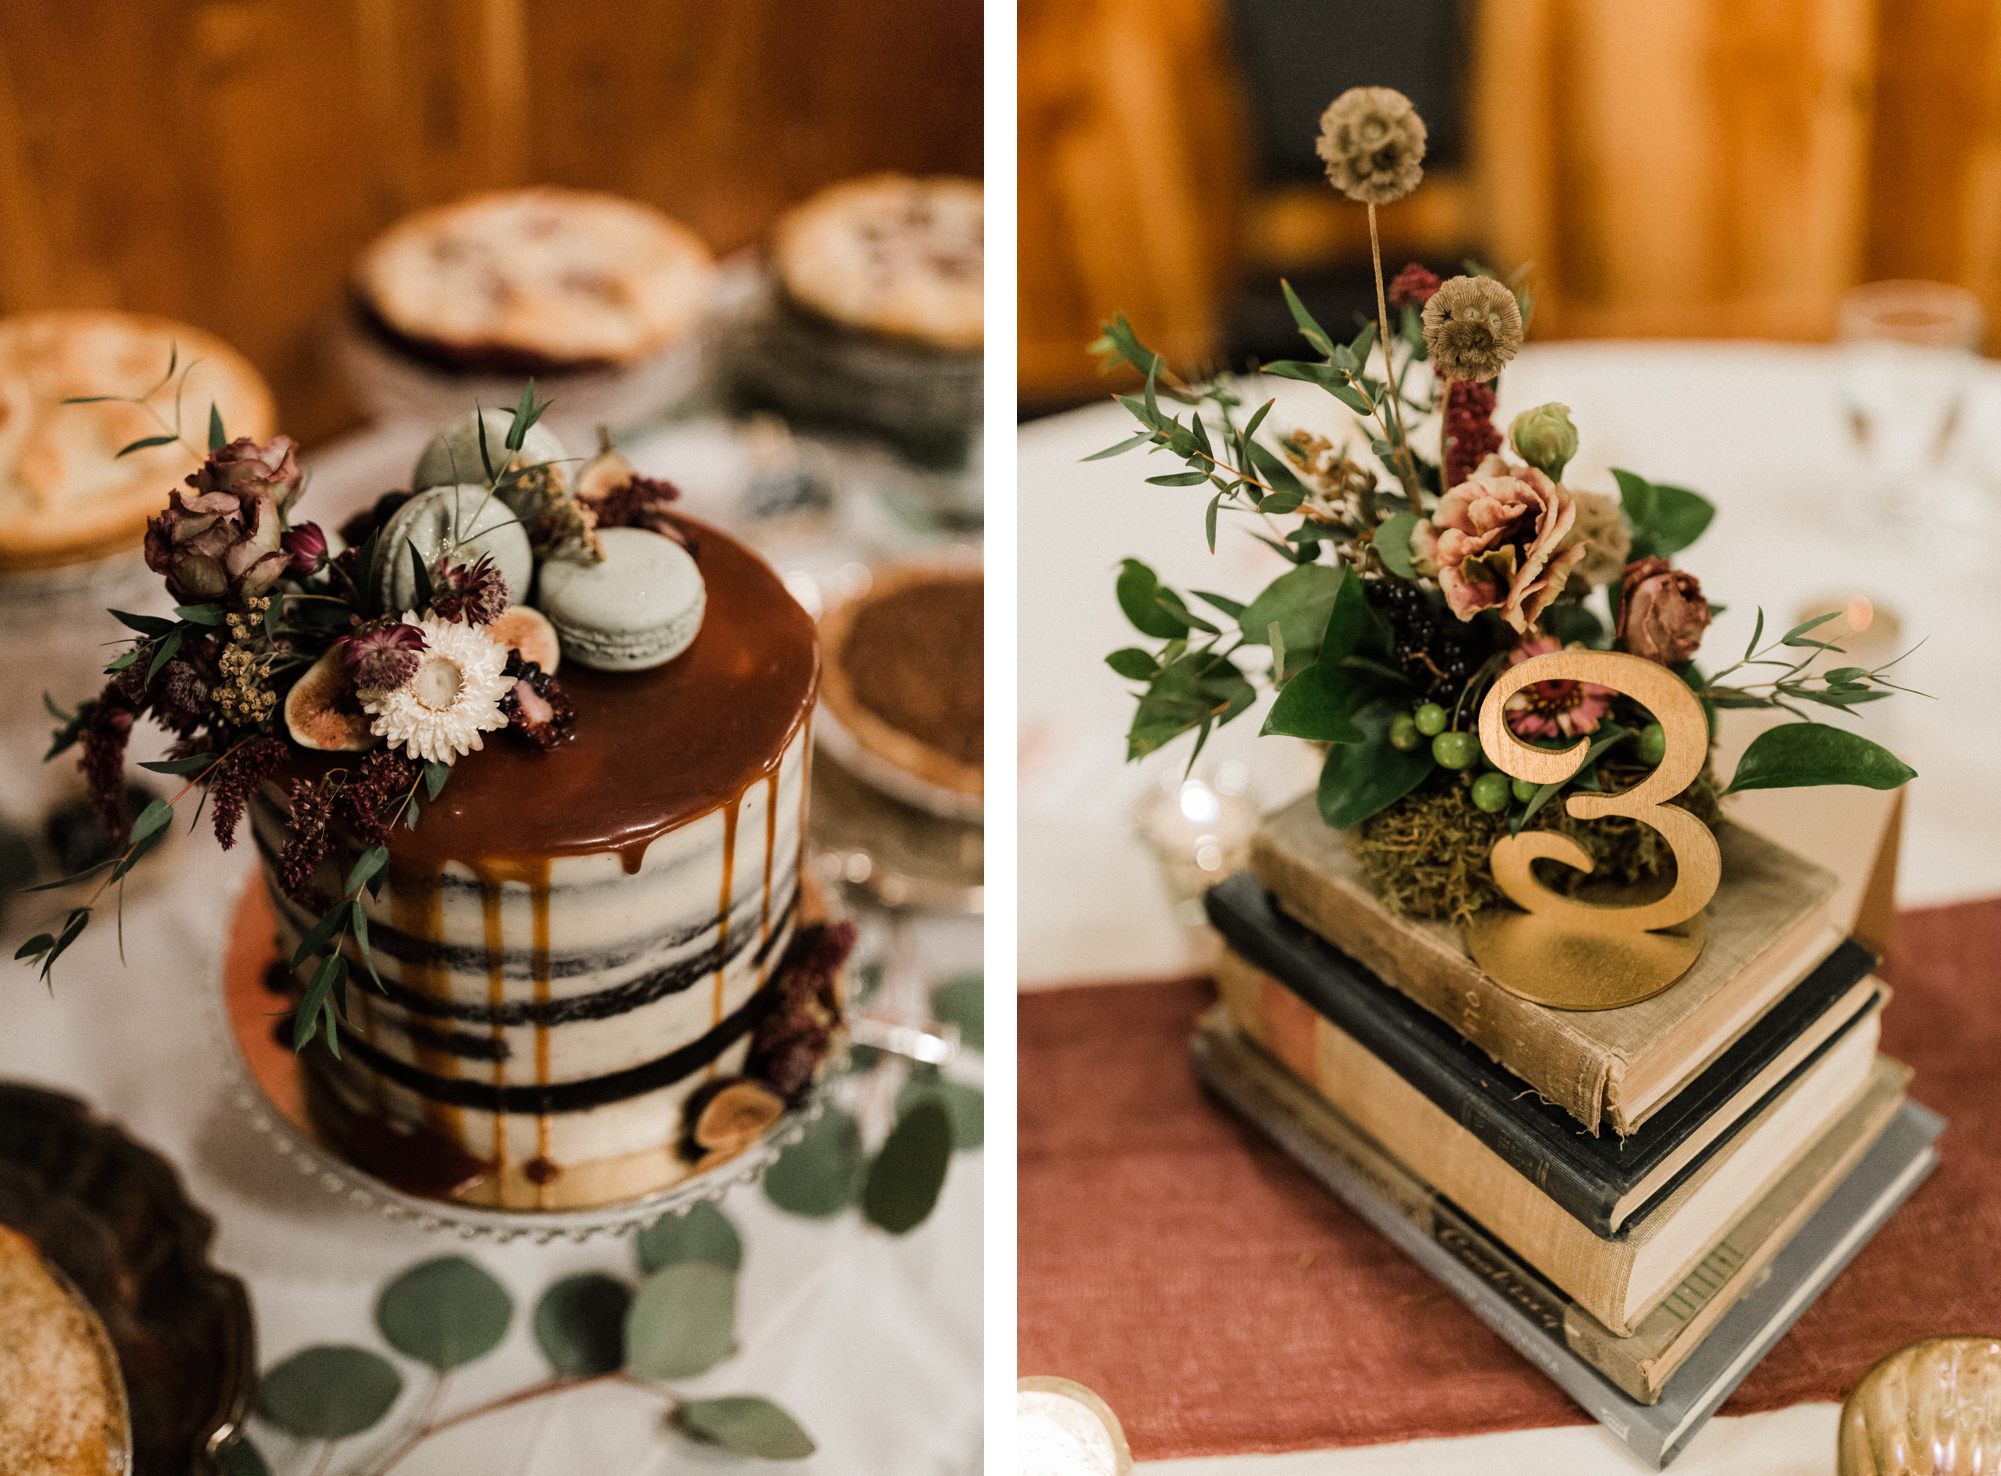 A wedding cake and table centerpiece at McMenamin's Old St. Francis School in Bend